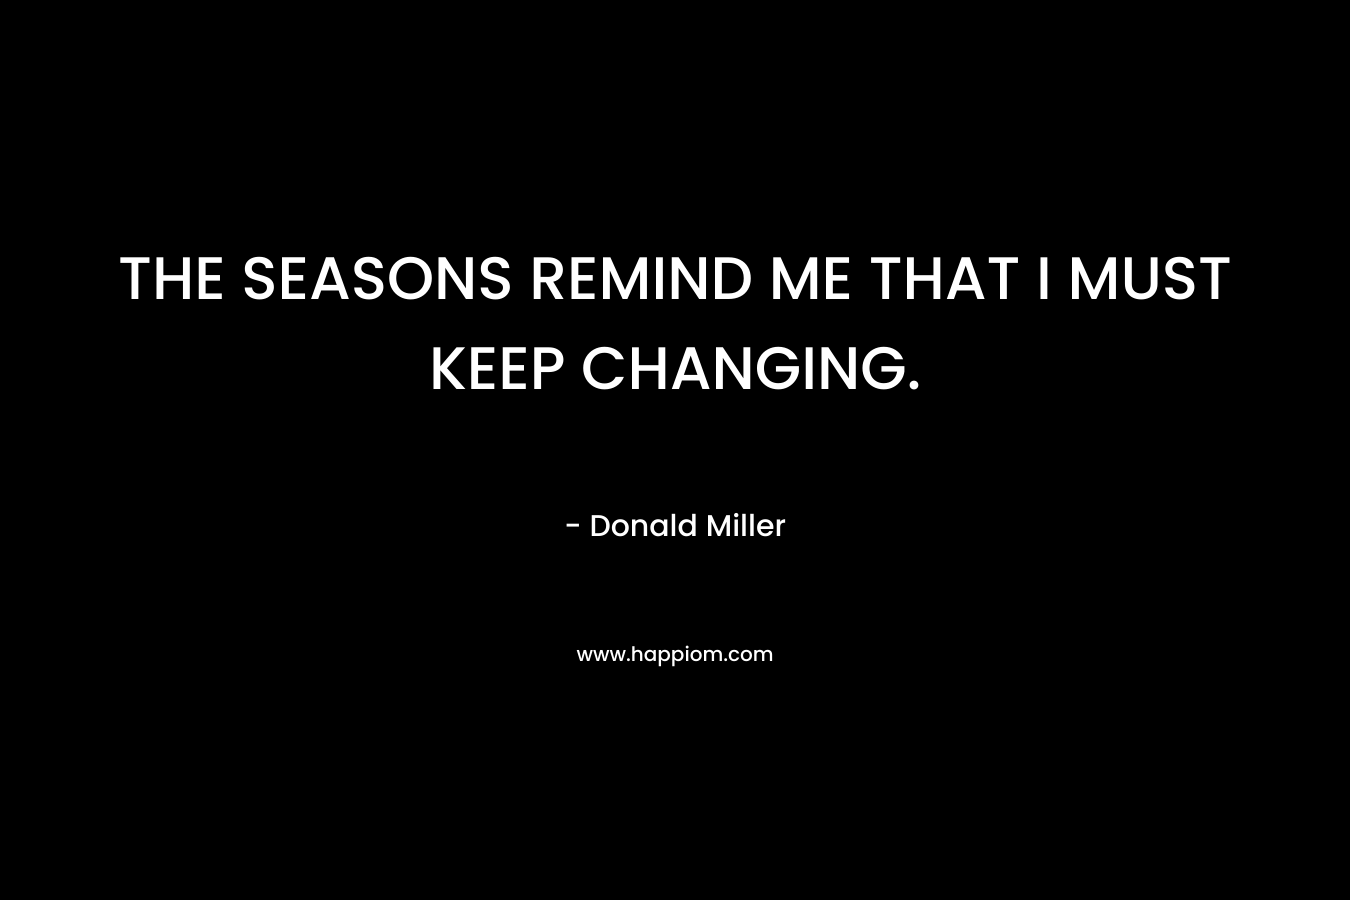 THE SEASONS REMIND ME THAT I MUST KEEP CHANGING.